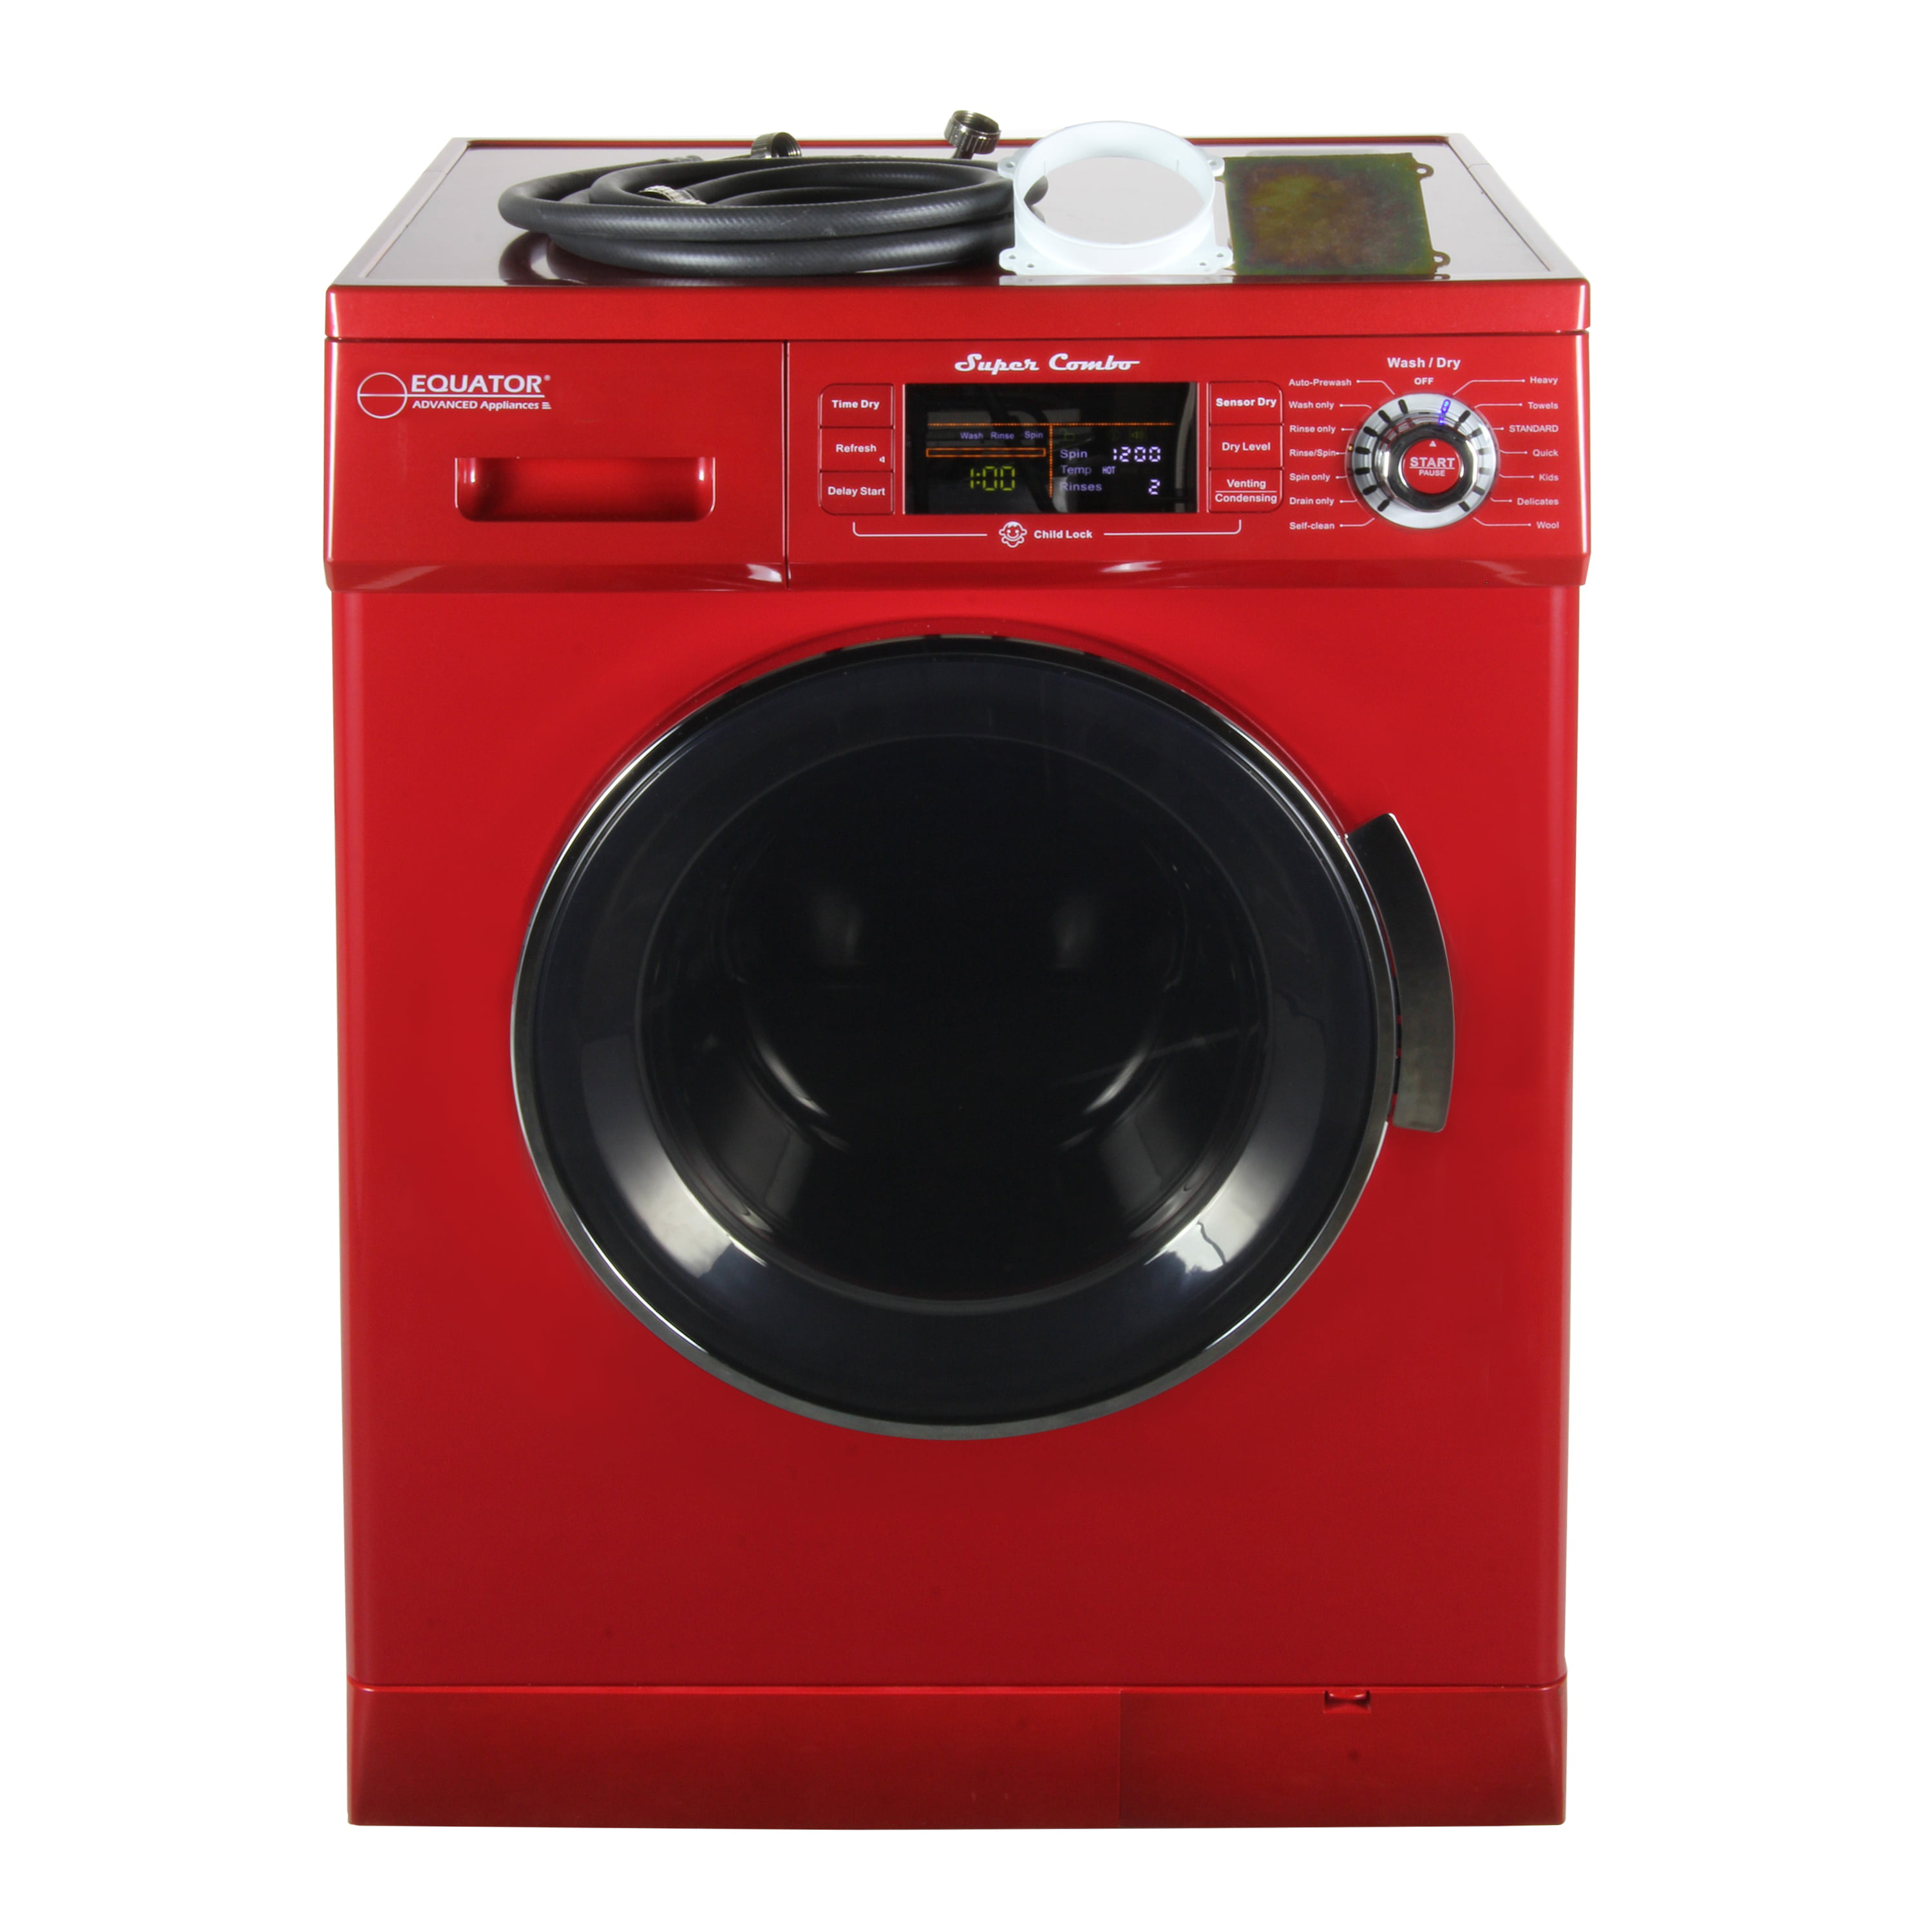 All-in-One 13 lb. 1200 RPM Compact Combo Washer Dryer with Optional Portable All In One Washer Dryer Combo